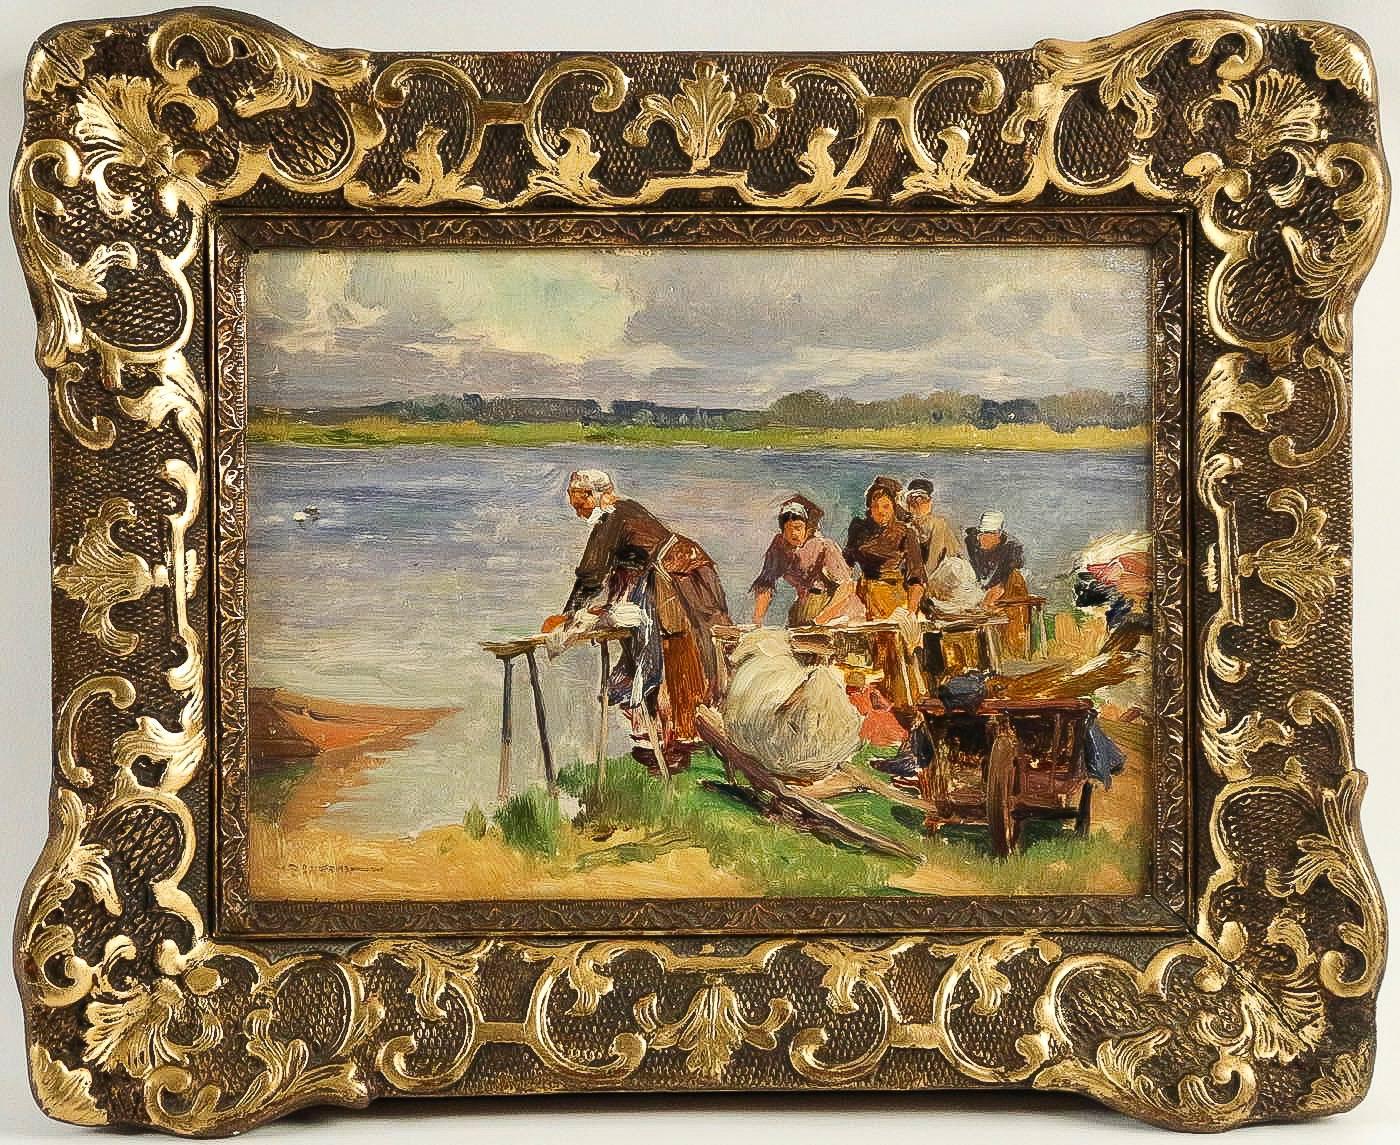 A beautiful oil on panel, The Washerwomen.

Our painting, French school, is an excellent condition and is signed by a famous French artist-painter, Emile-Charles Dameron, circa 1880-1890.

Dimensions unframed: H 9.44 in., W 12.99 in.
Dimensions with